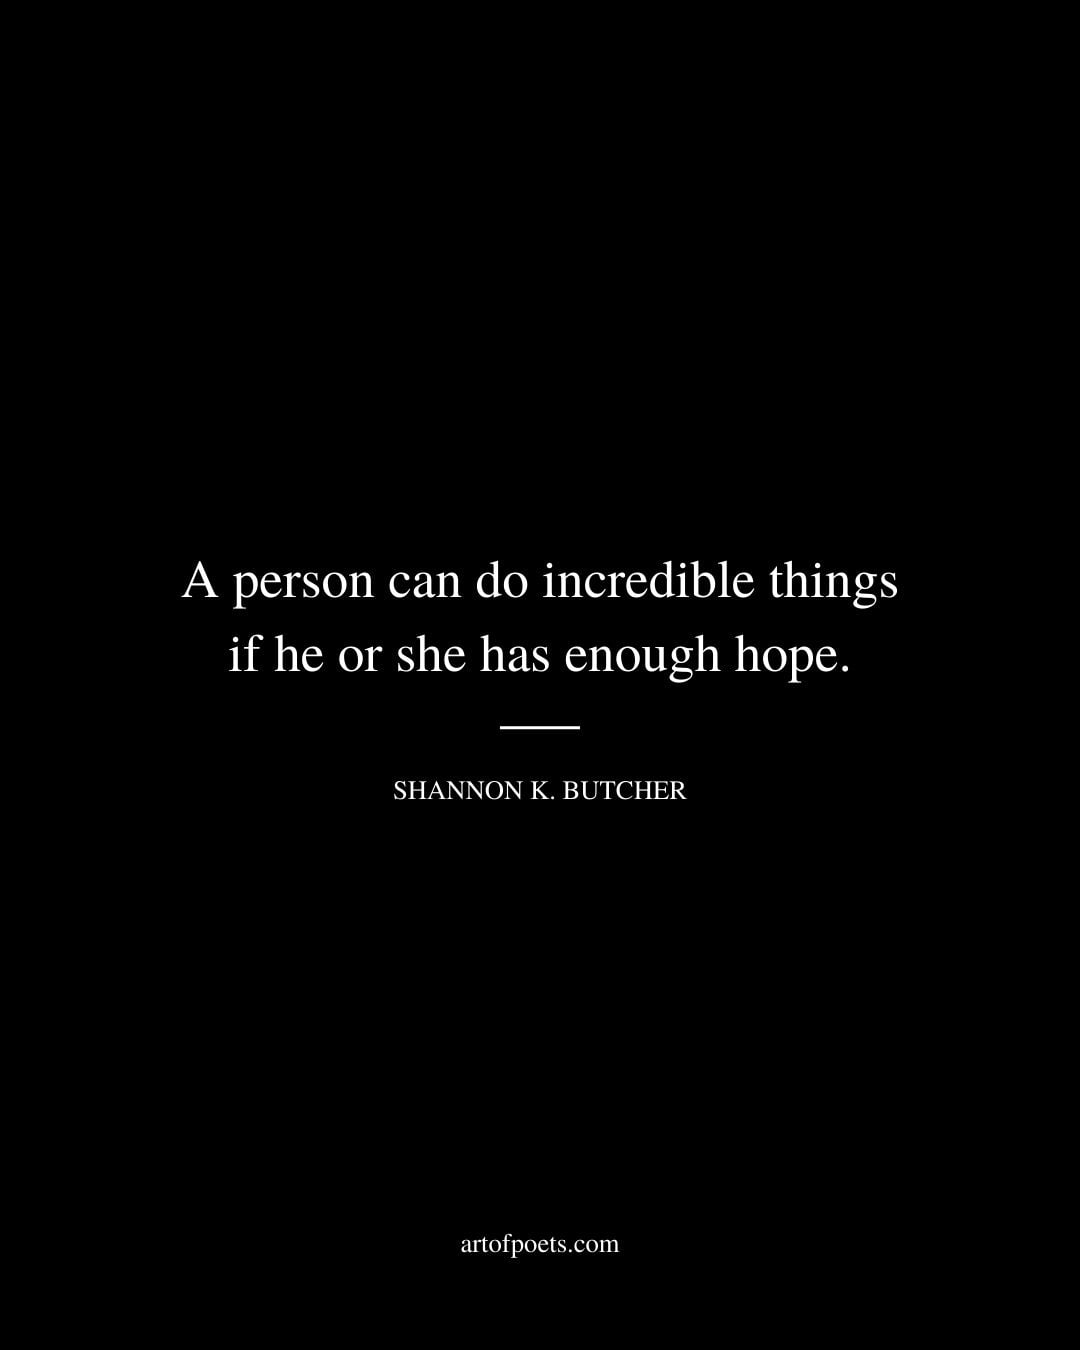 A person can do incredible things if he or she has enough hope. Shannon K. Butcher